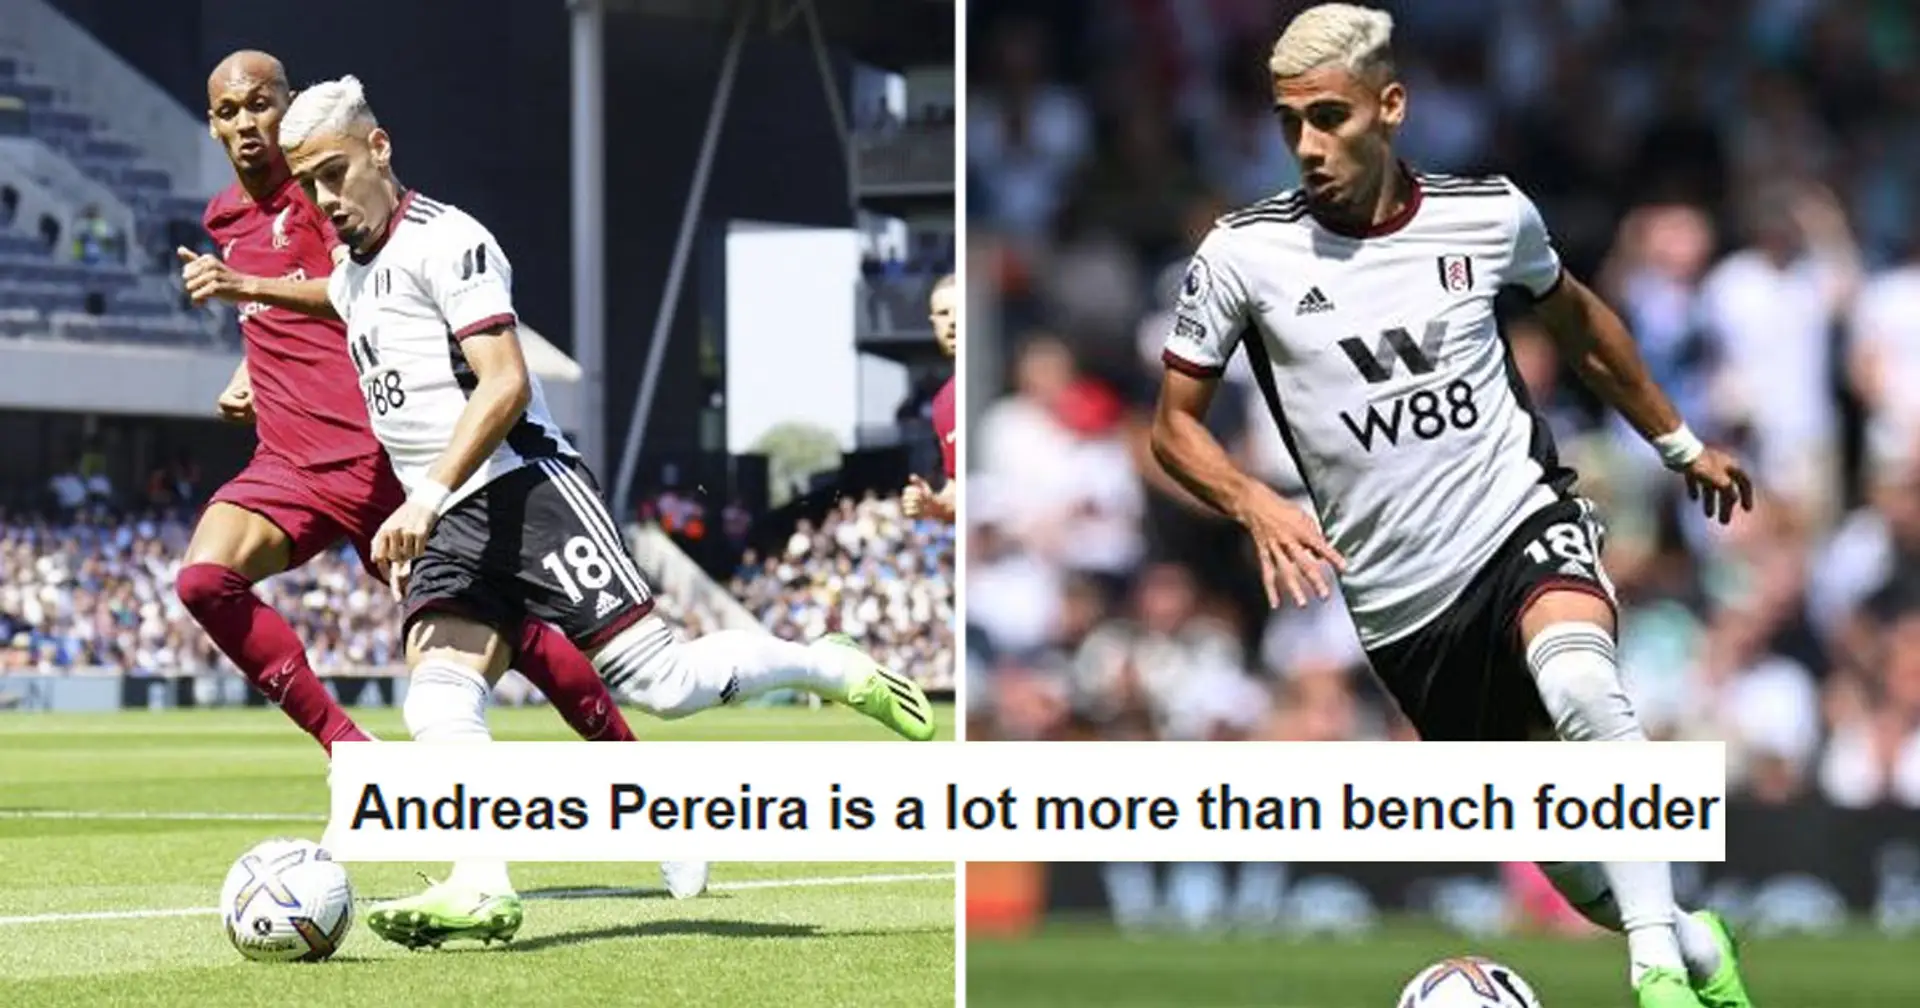 'Is there a buy-back clause?': Man United fans react as Andreas Pereira helps Fulham hold Liverpool to draw